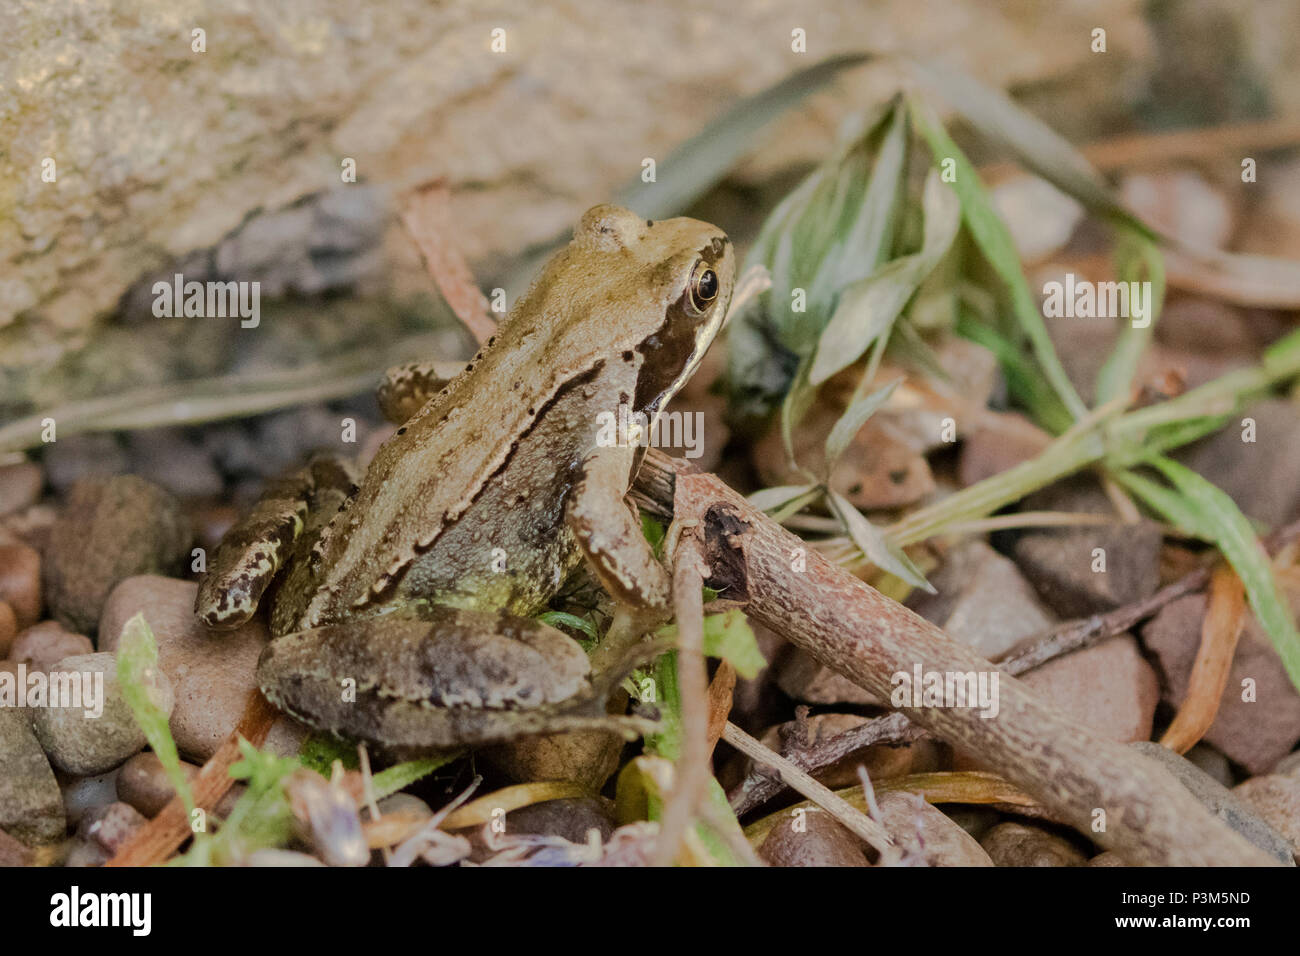 A common frog (UK) in a garden. Stock Photo